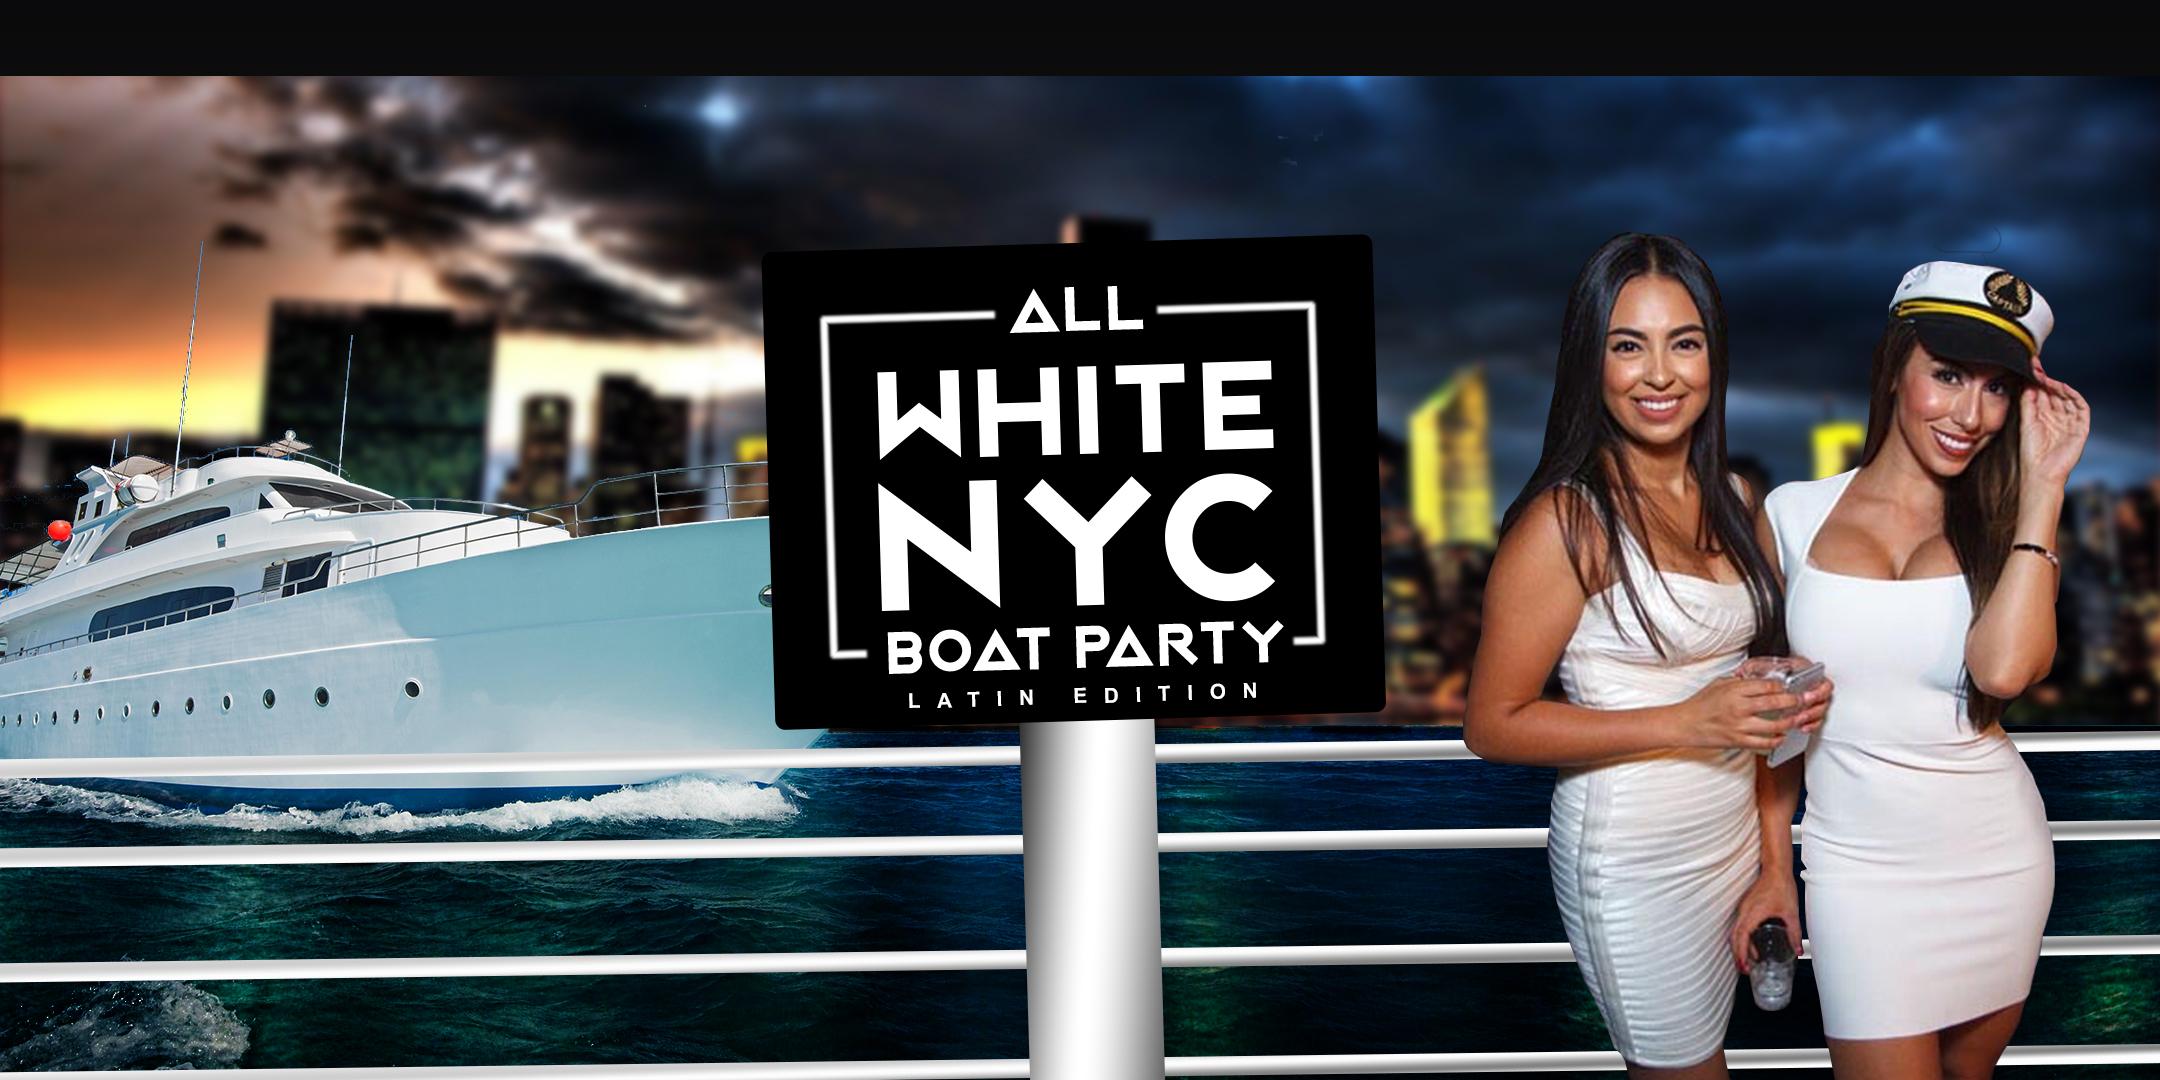 All White Latin & Hip Hop Boat Party - Midtown Yacht Cruise NYC Skyline